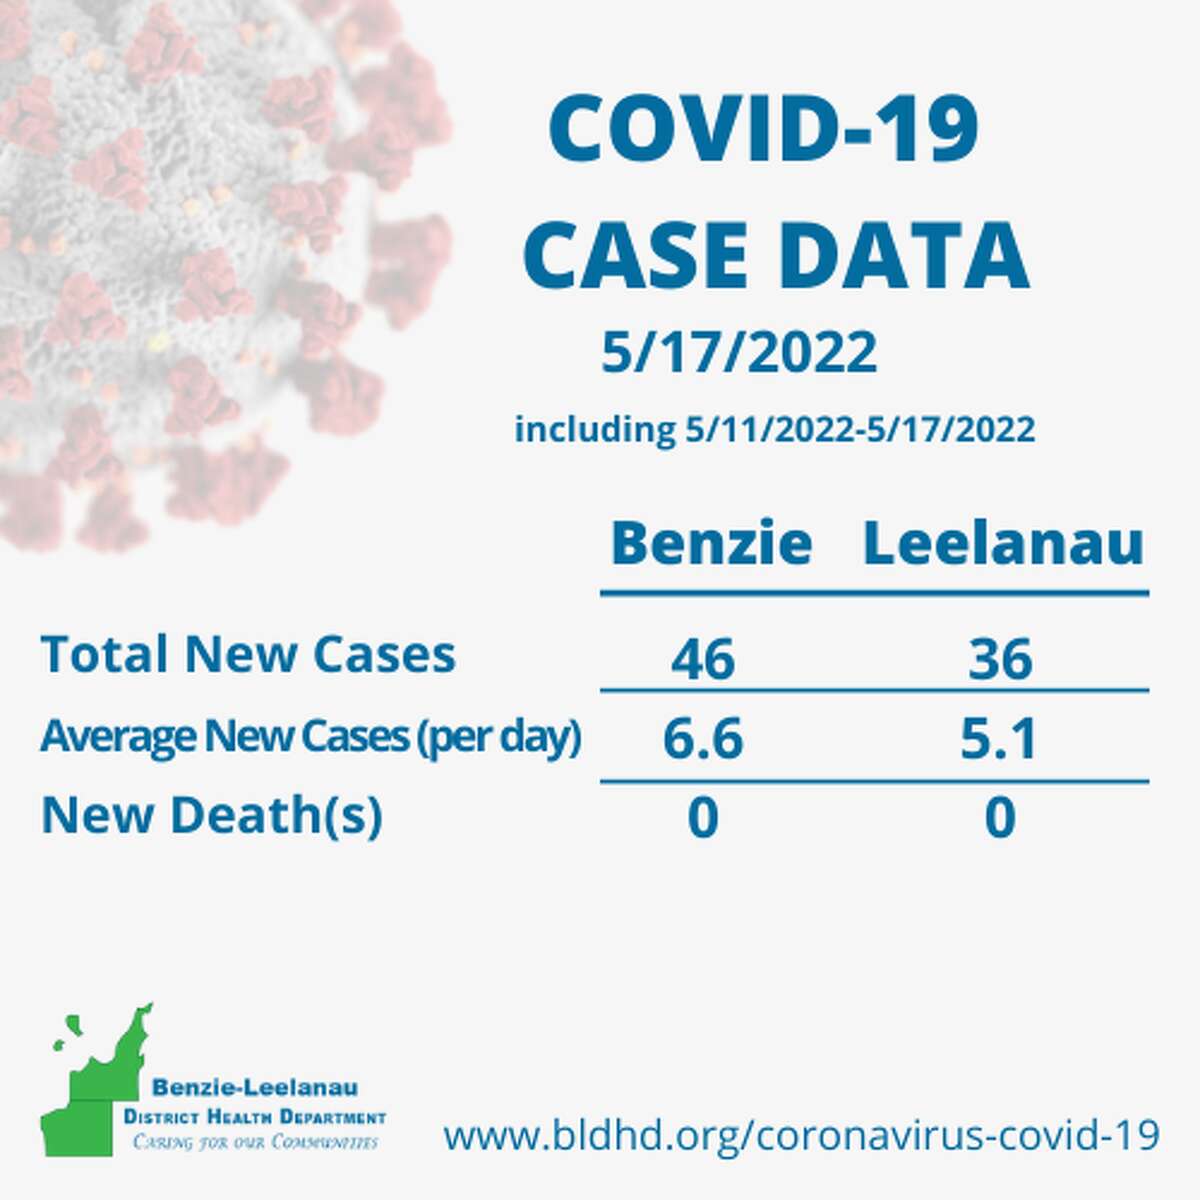 The latest COVID-19 case count in Benzie and Leelnau Counties according to the Benzie-Leelnau District Health Department. 